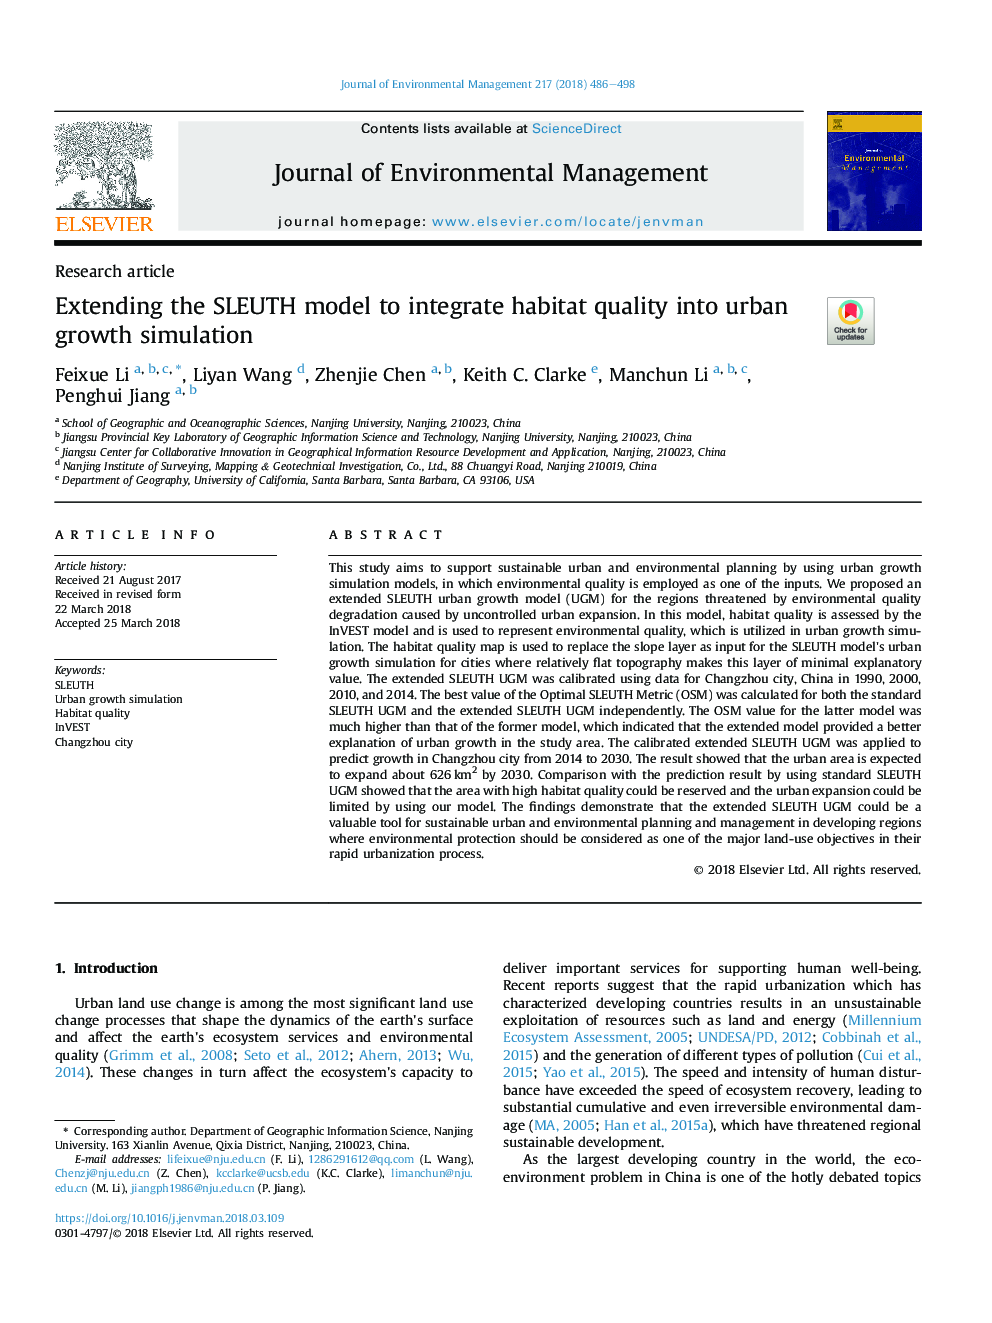 Extending the SLEUTH model to integrate habitat quality into urban growth simulation